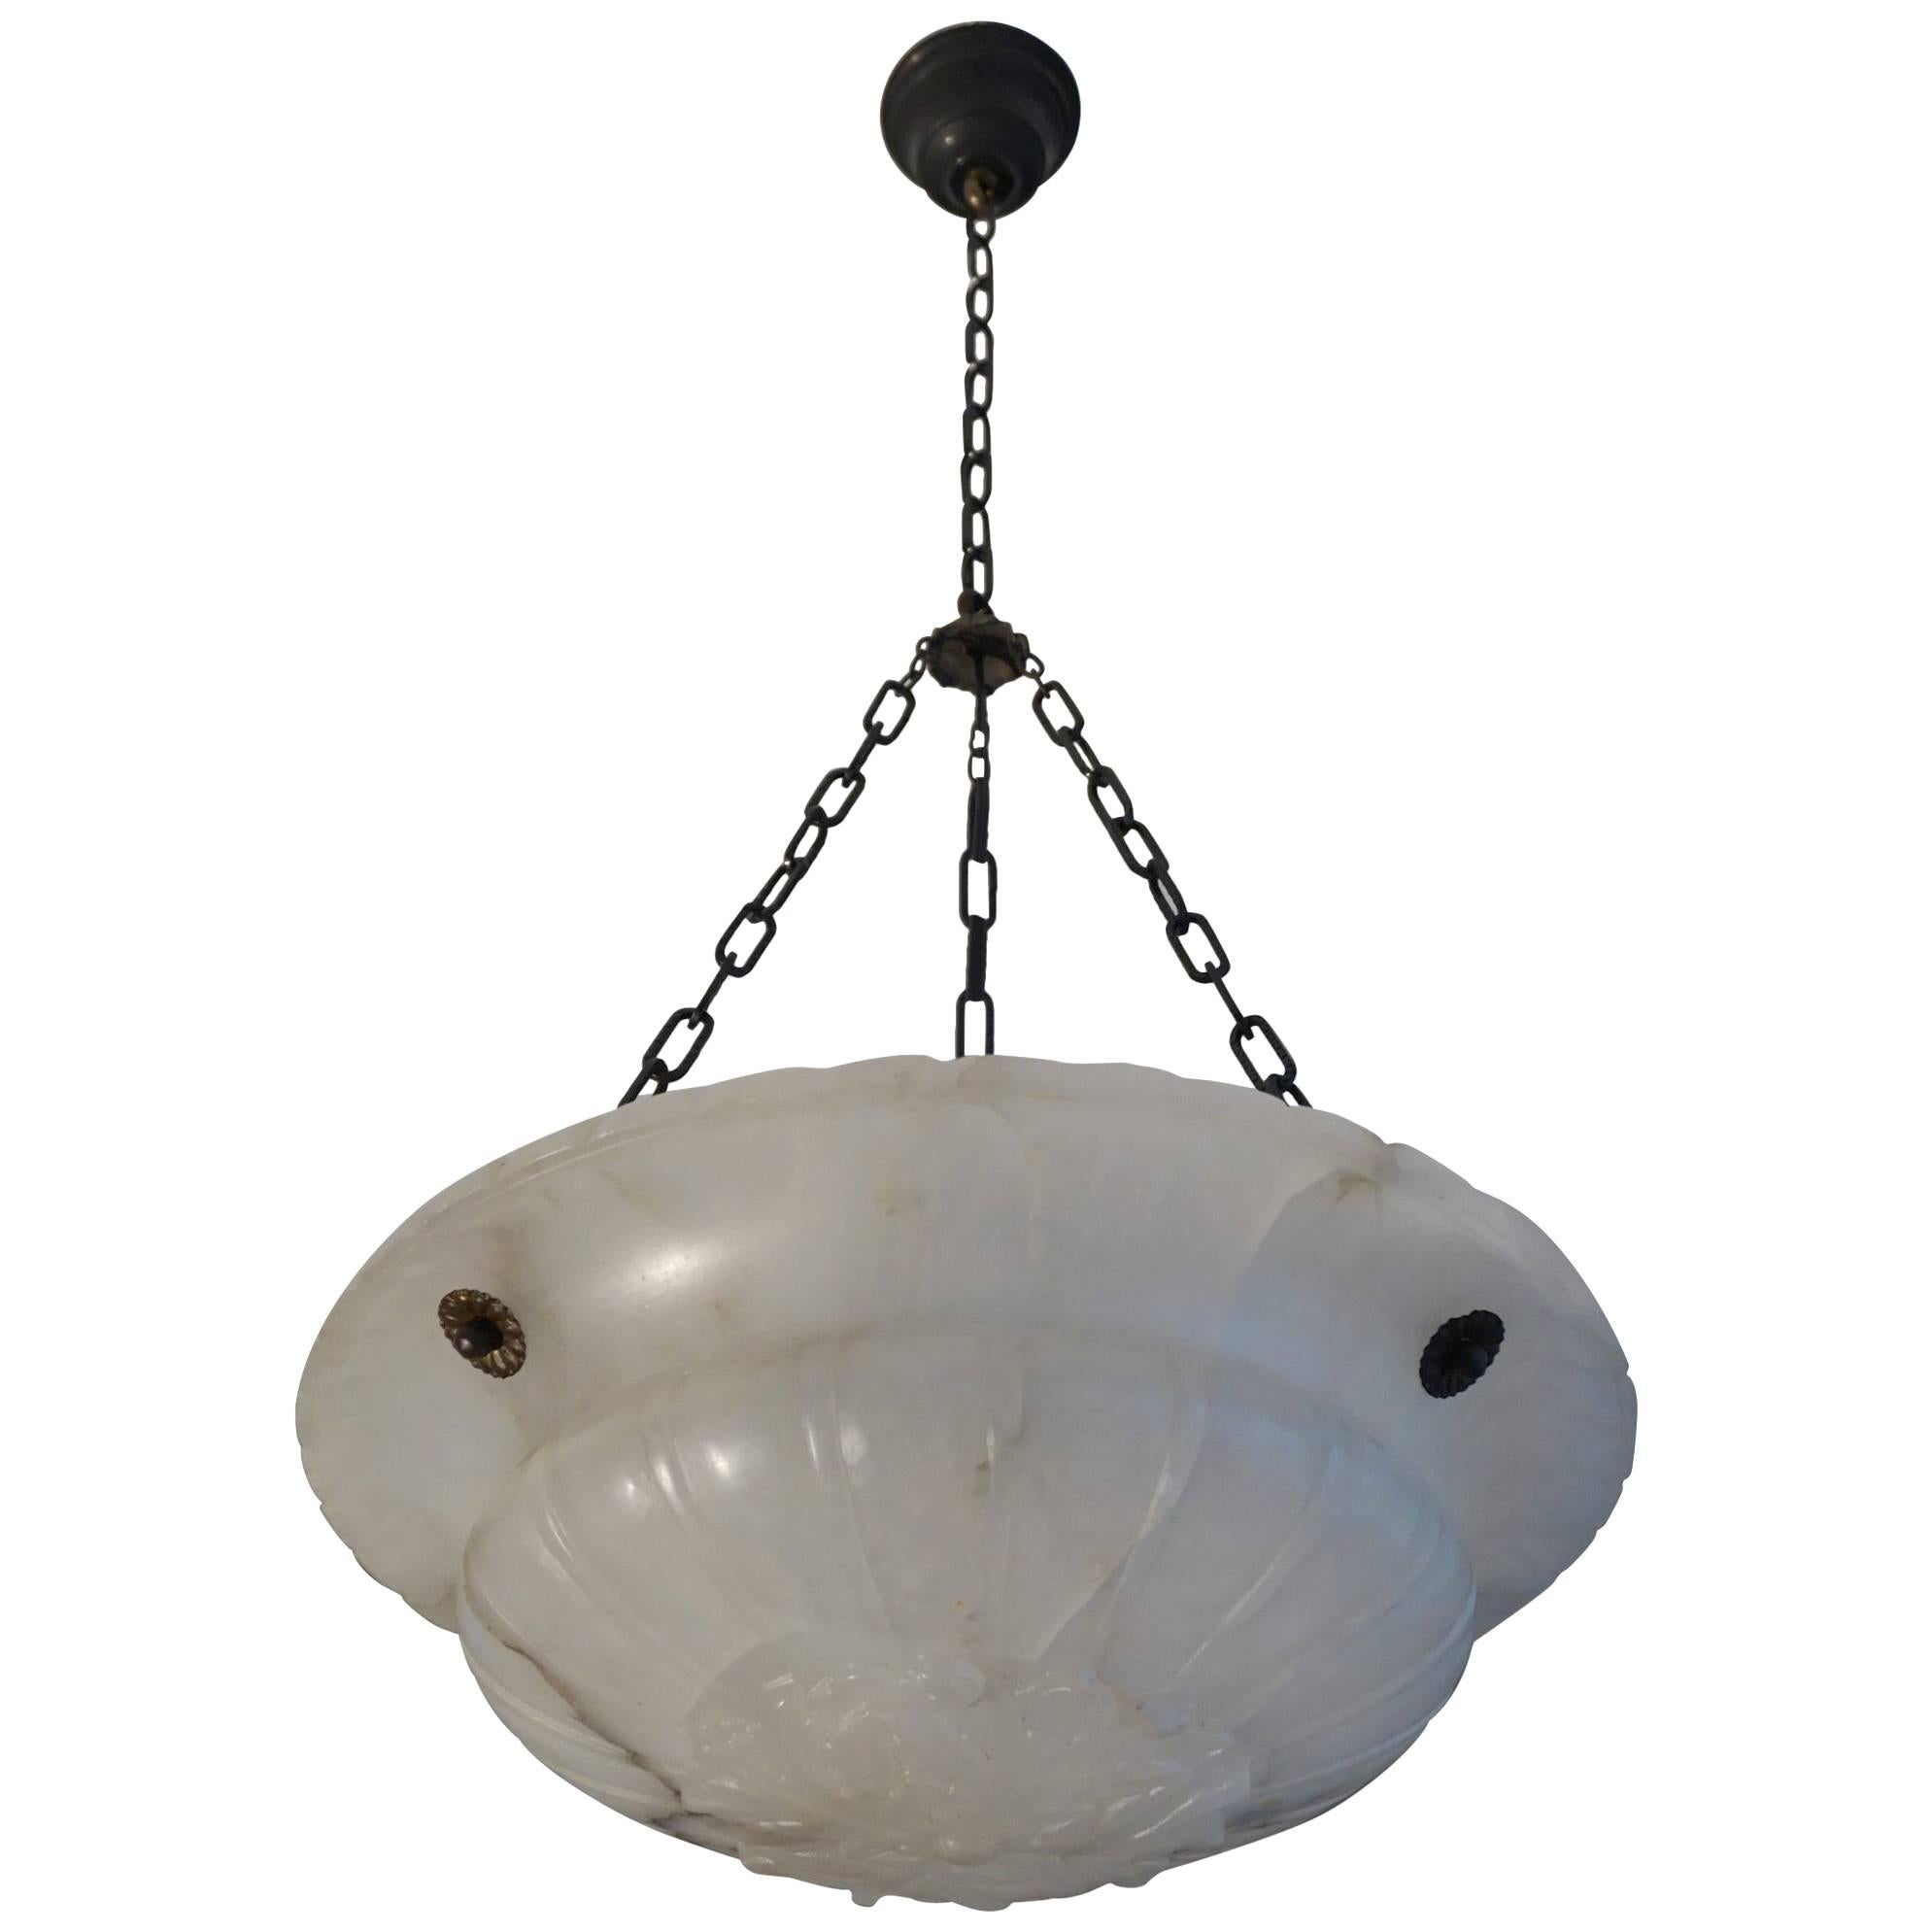 Near Translucent White Neoclassical Alabaster & Chain Pendant / Ceiling Lamp